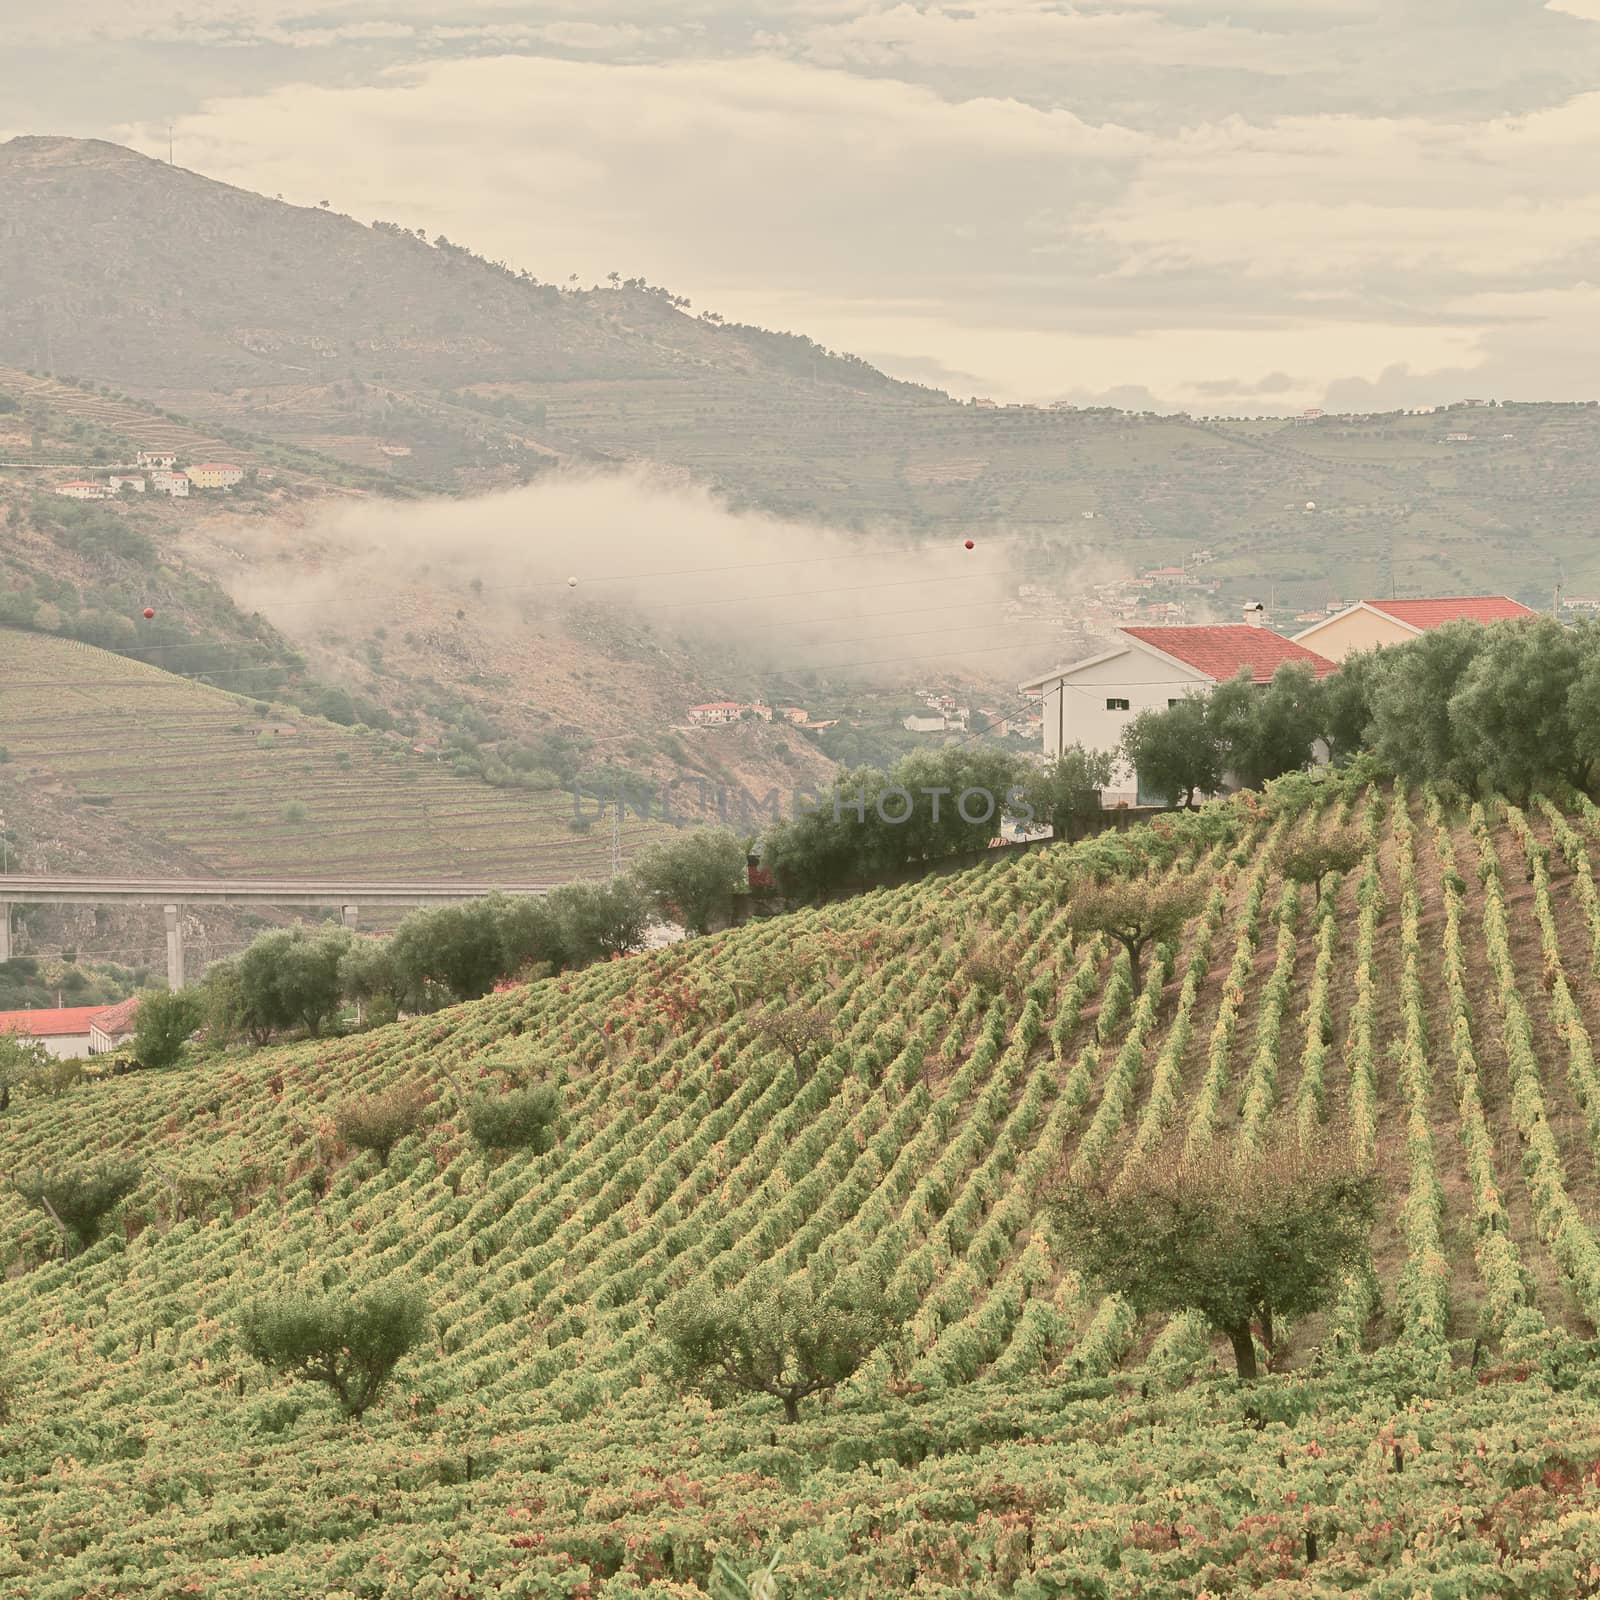 Extensive Vineyards on the Hills of Portugal, Retro Image Filtered Style